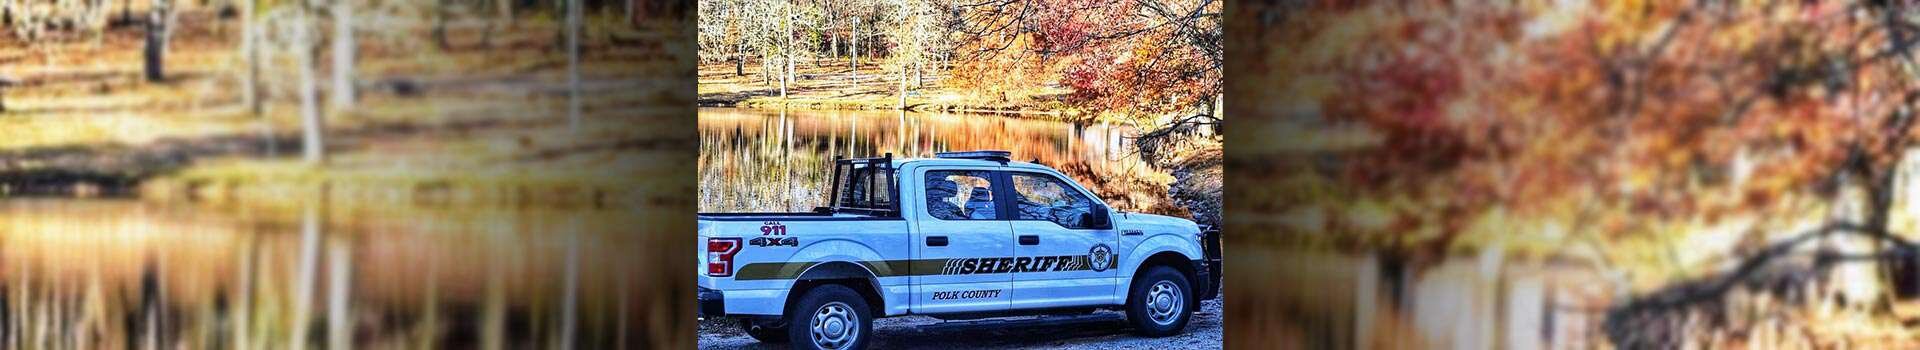 A Polk County sheriff truck parked next to a lake also featuring a backdrop of trees in the fall.